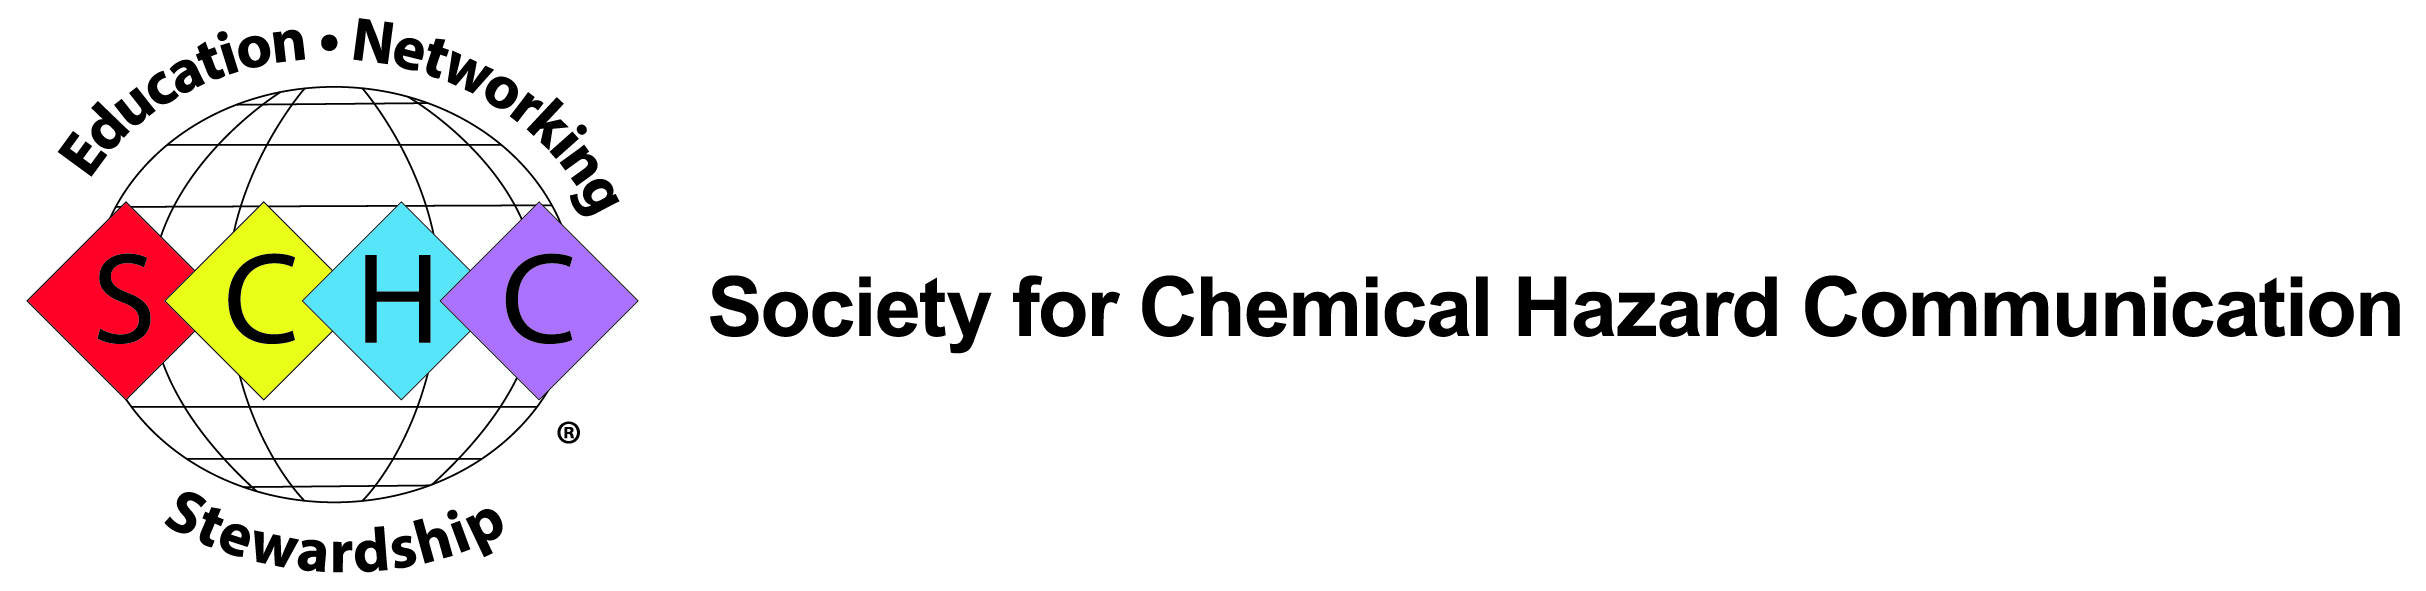 Society For Chemical Hazard Communication Fall Meeting